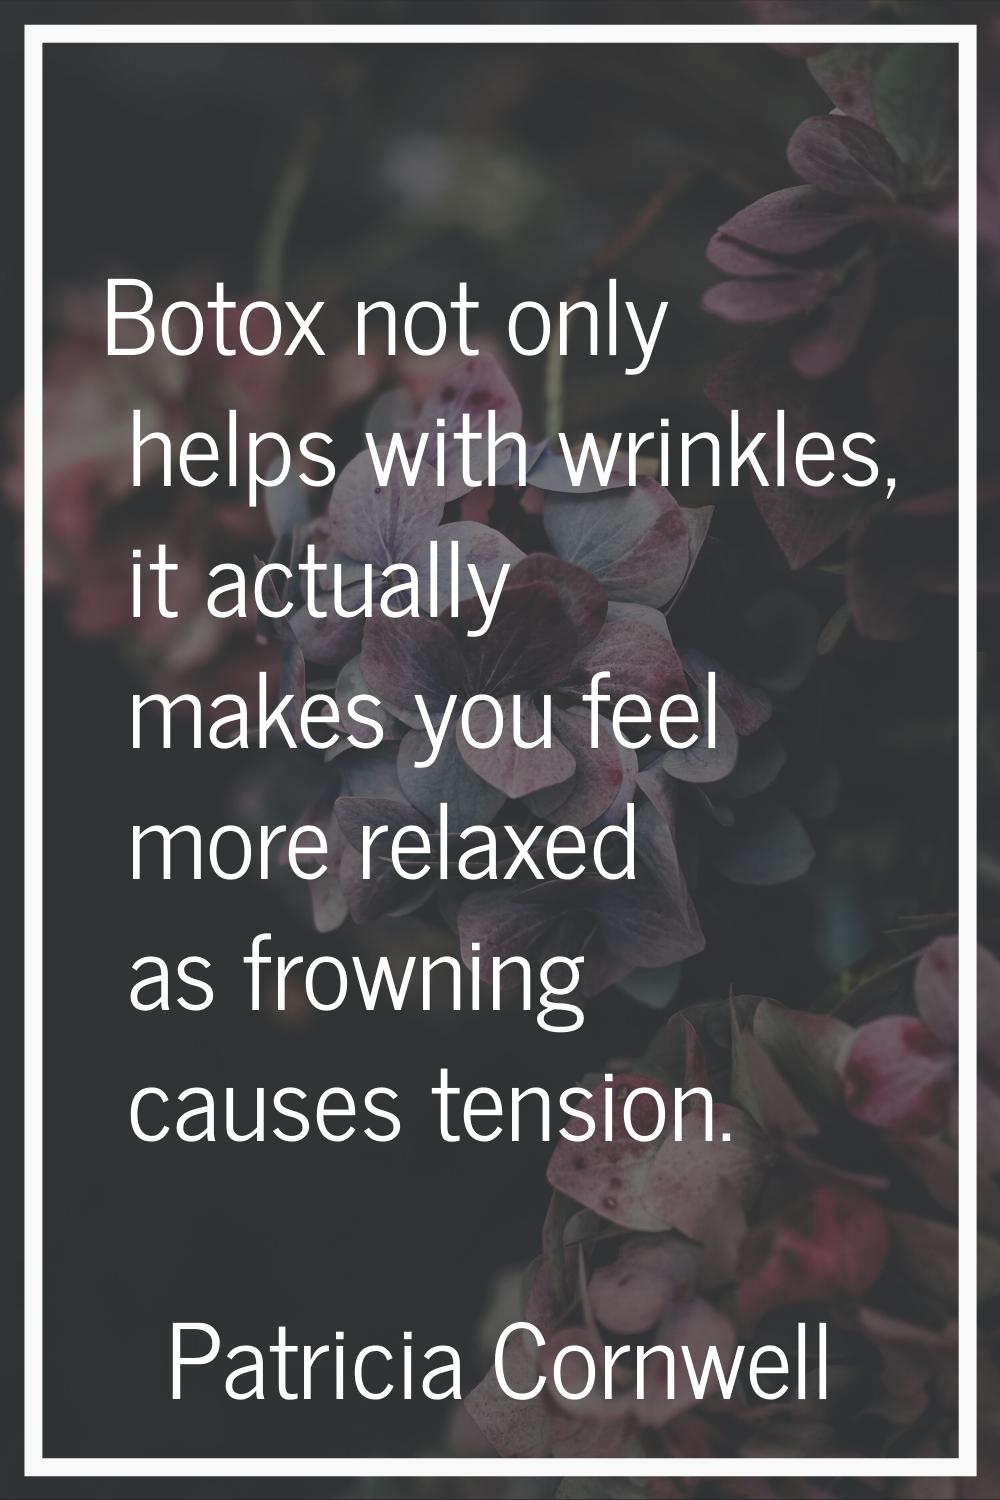 Botox not only helps with wrinkles, it actually makes you feel more relaxed as frowning causes tens